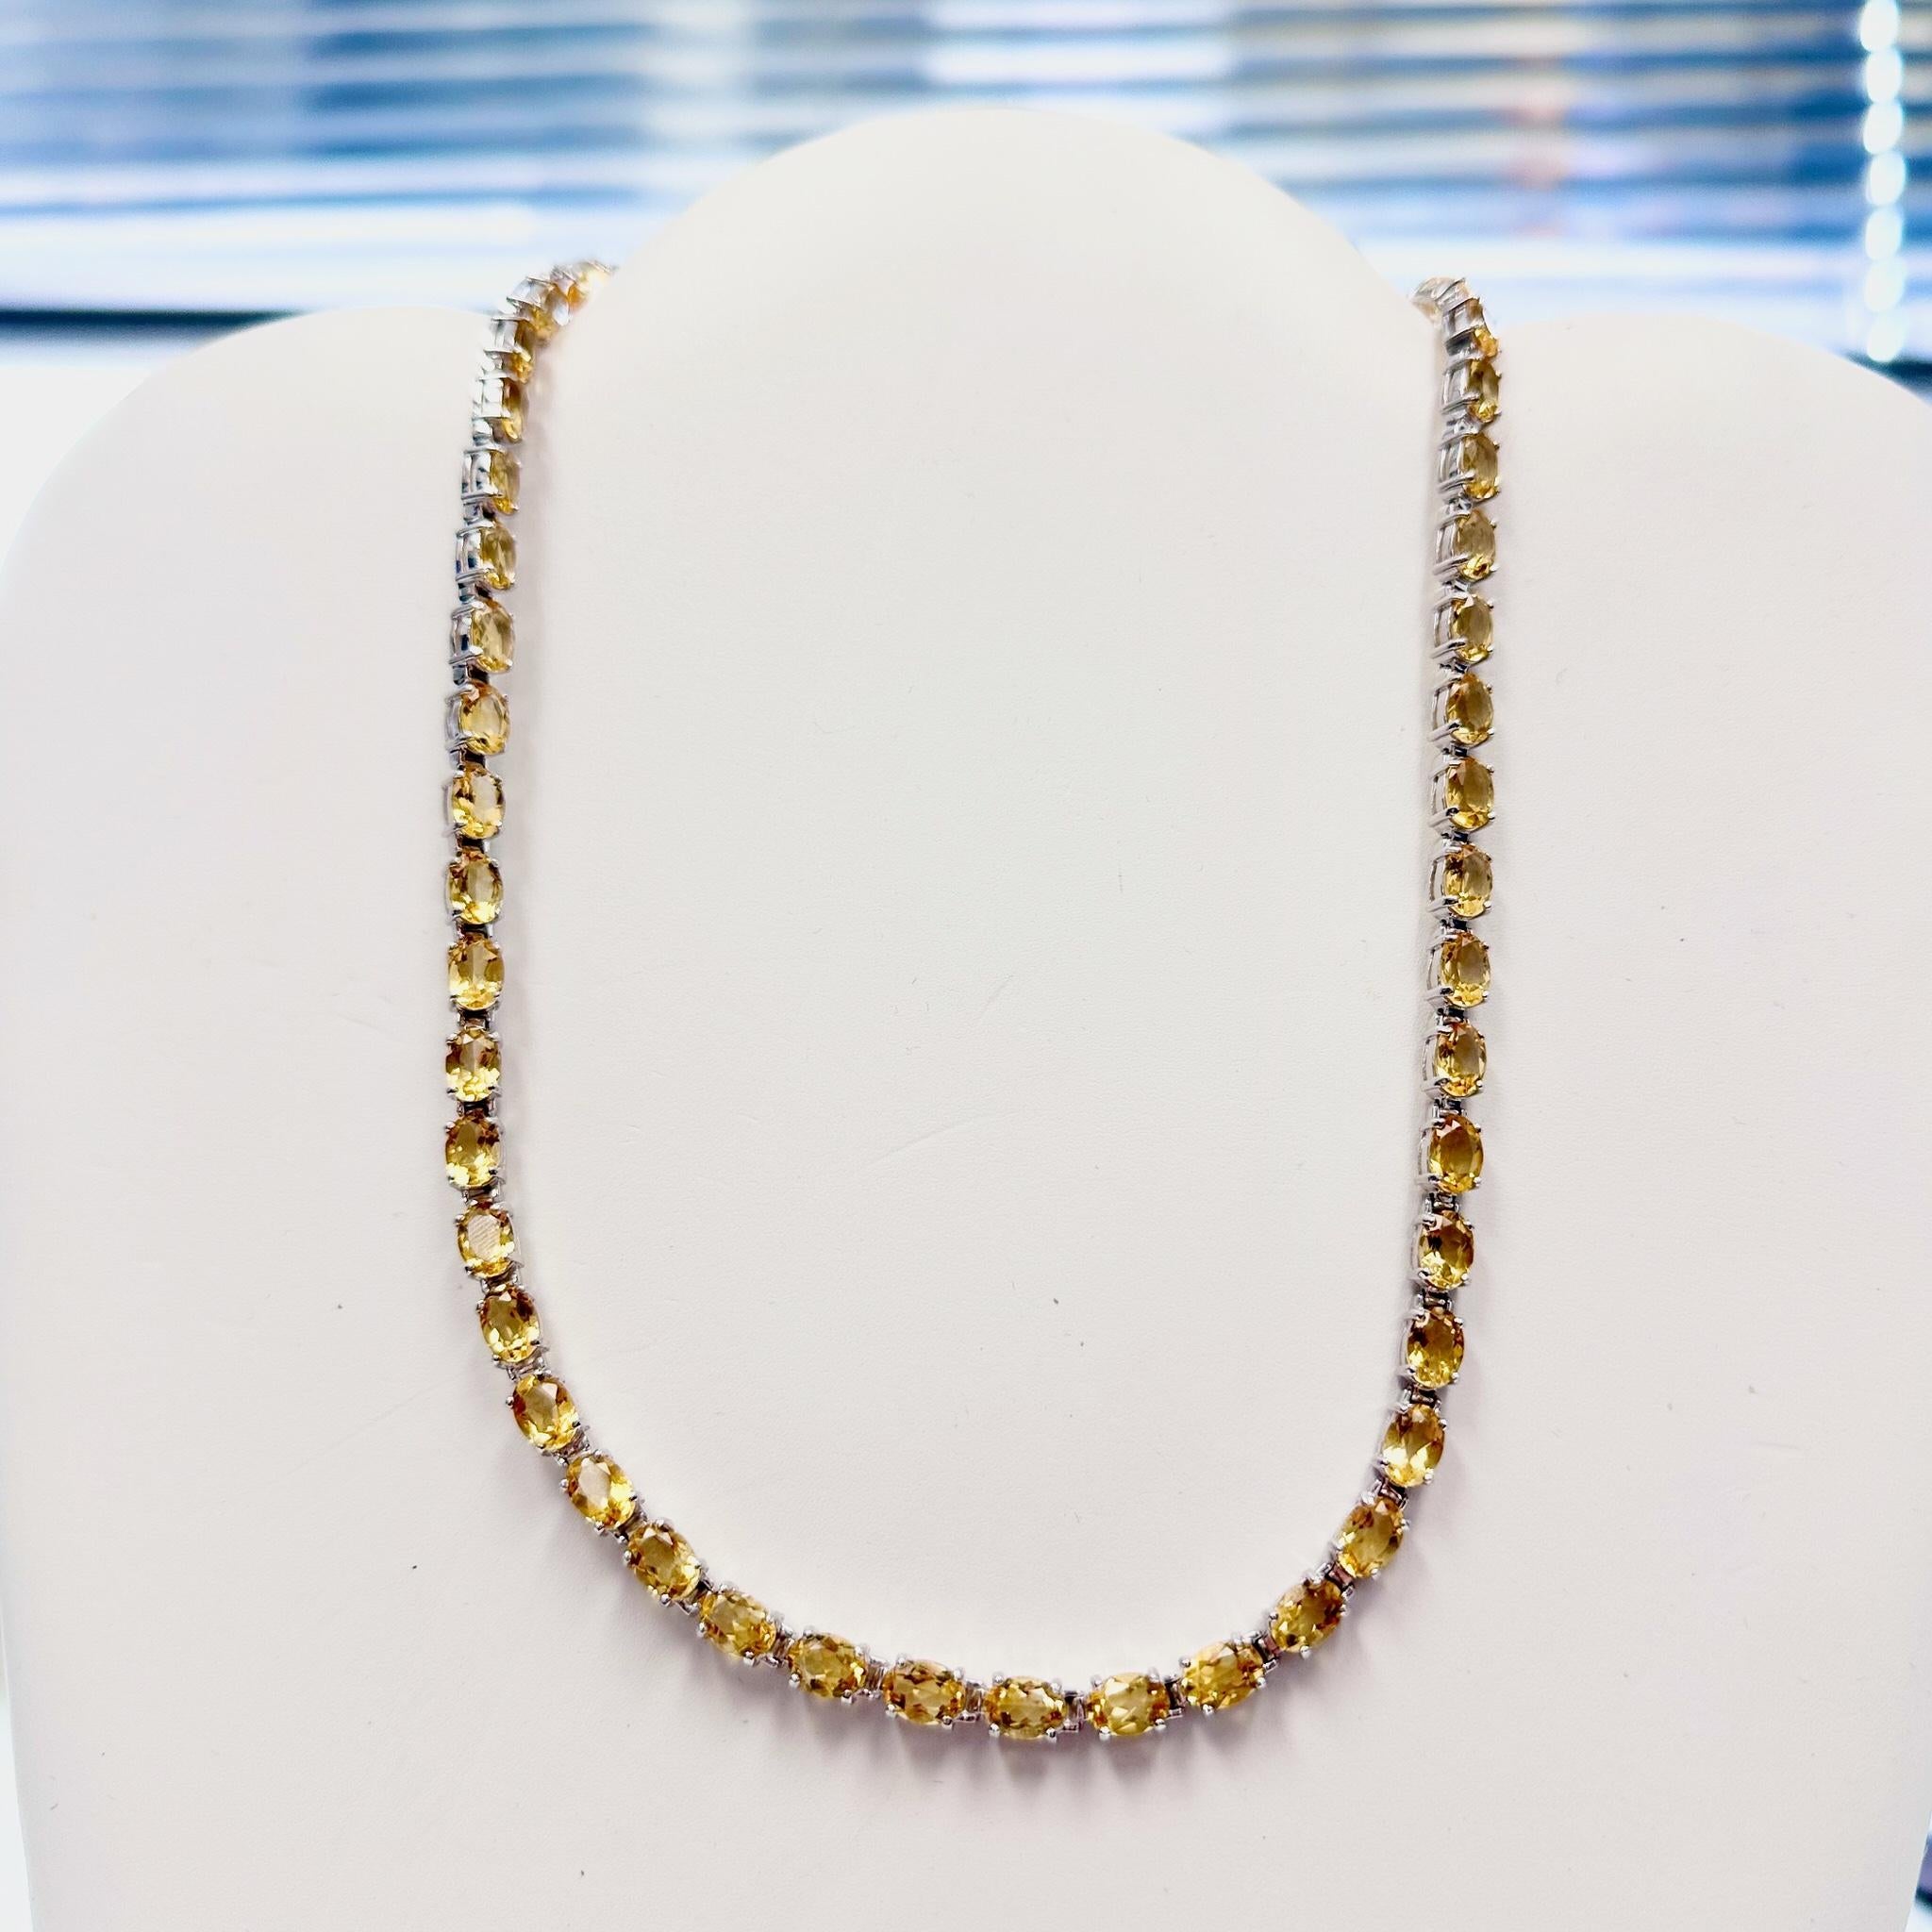 Oval Cut Natural Citrine Tennis Necklace 39 Carats Sterling Silver